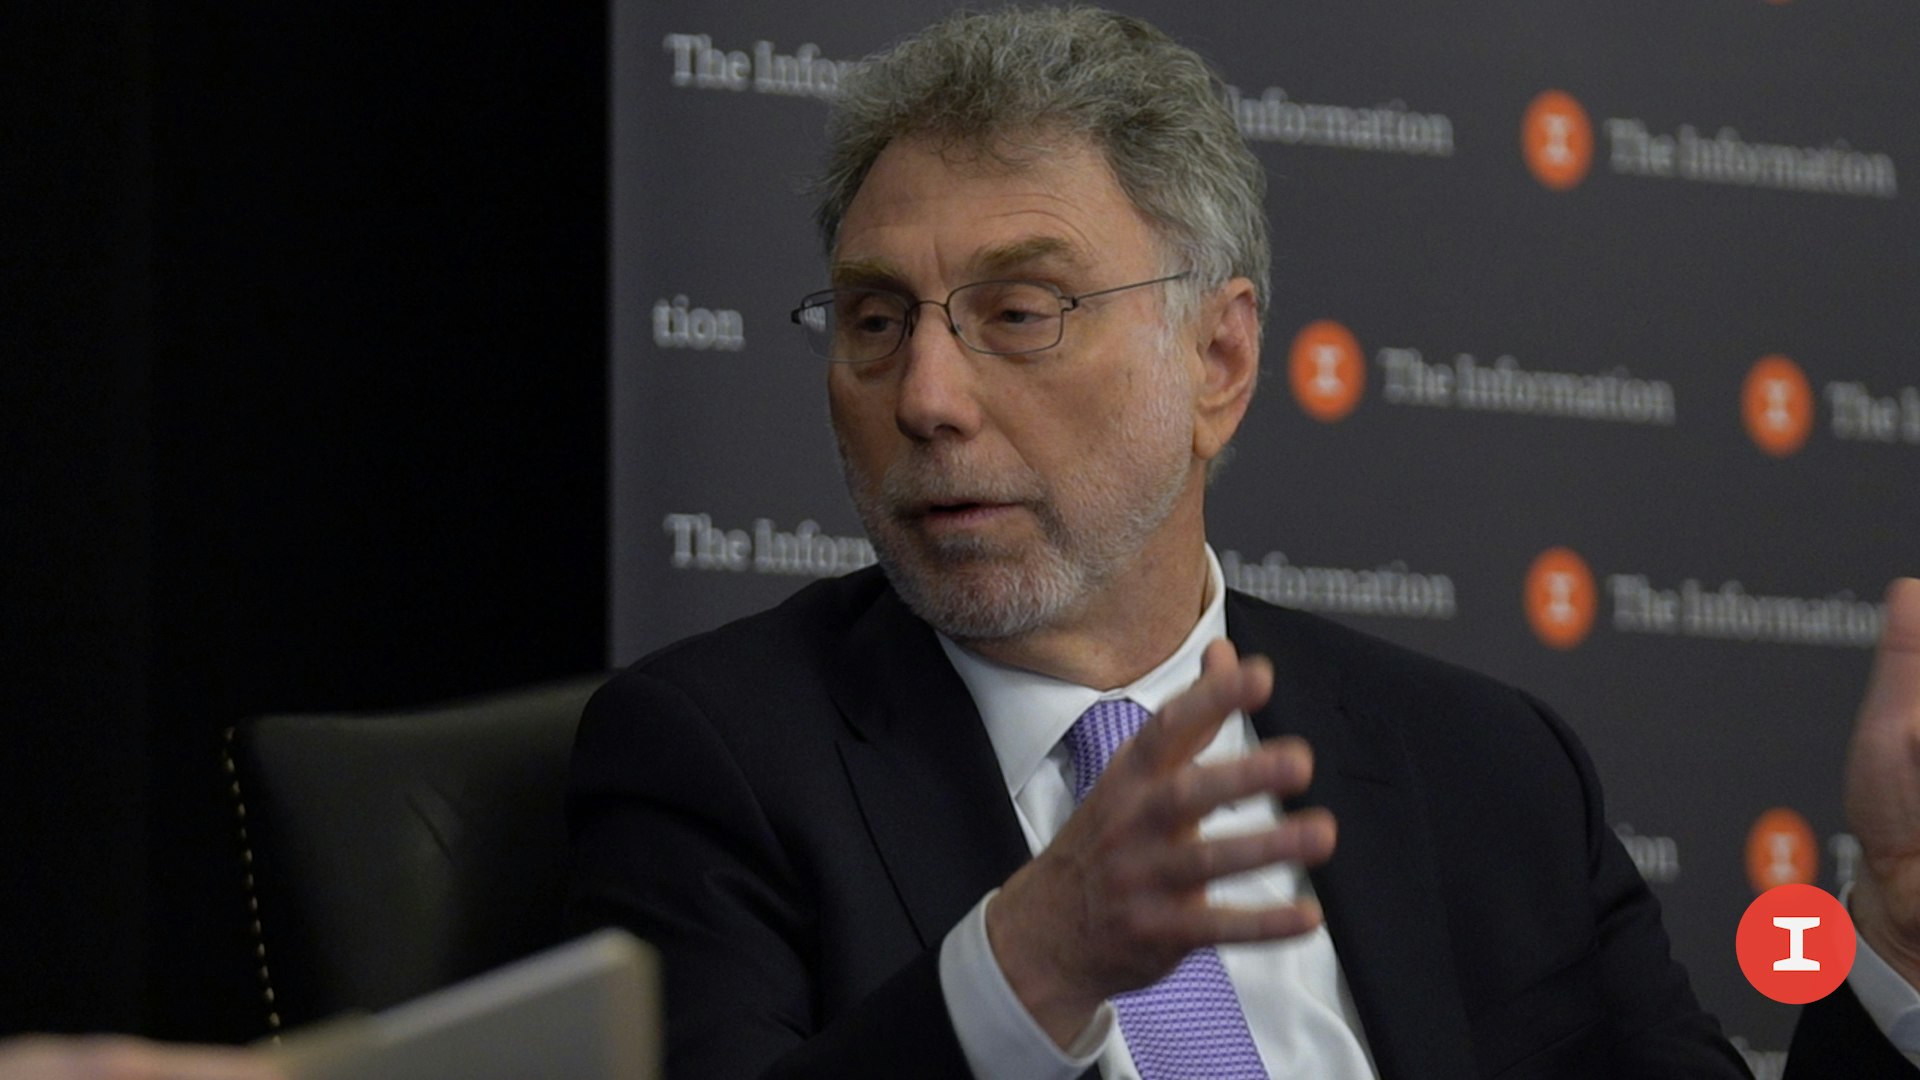 Marty Baron and Katie Couric on the Business of Journalism